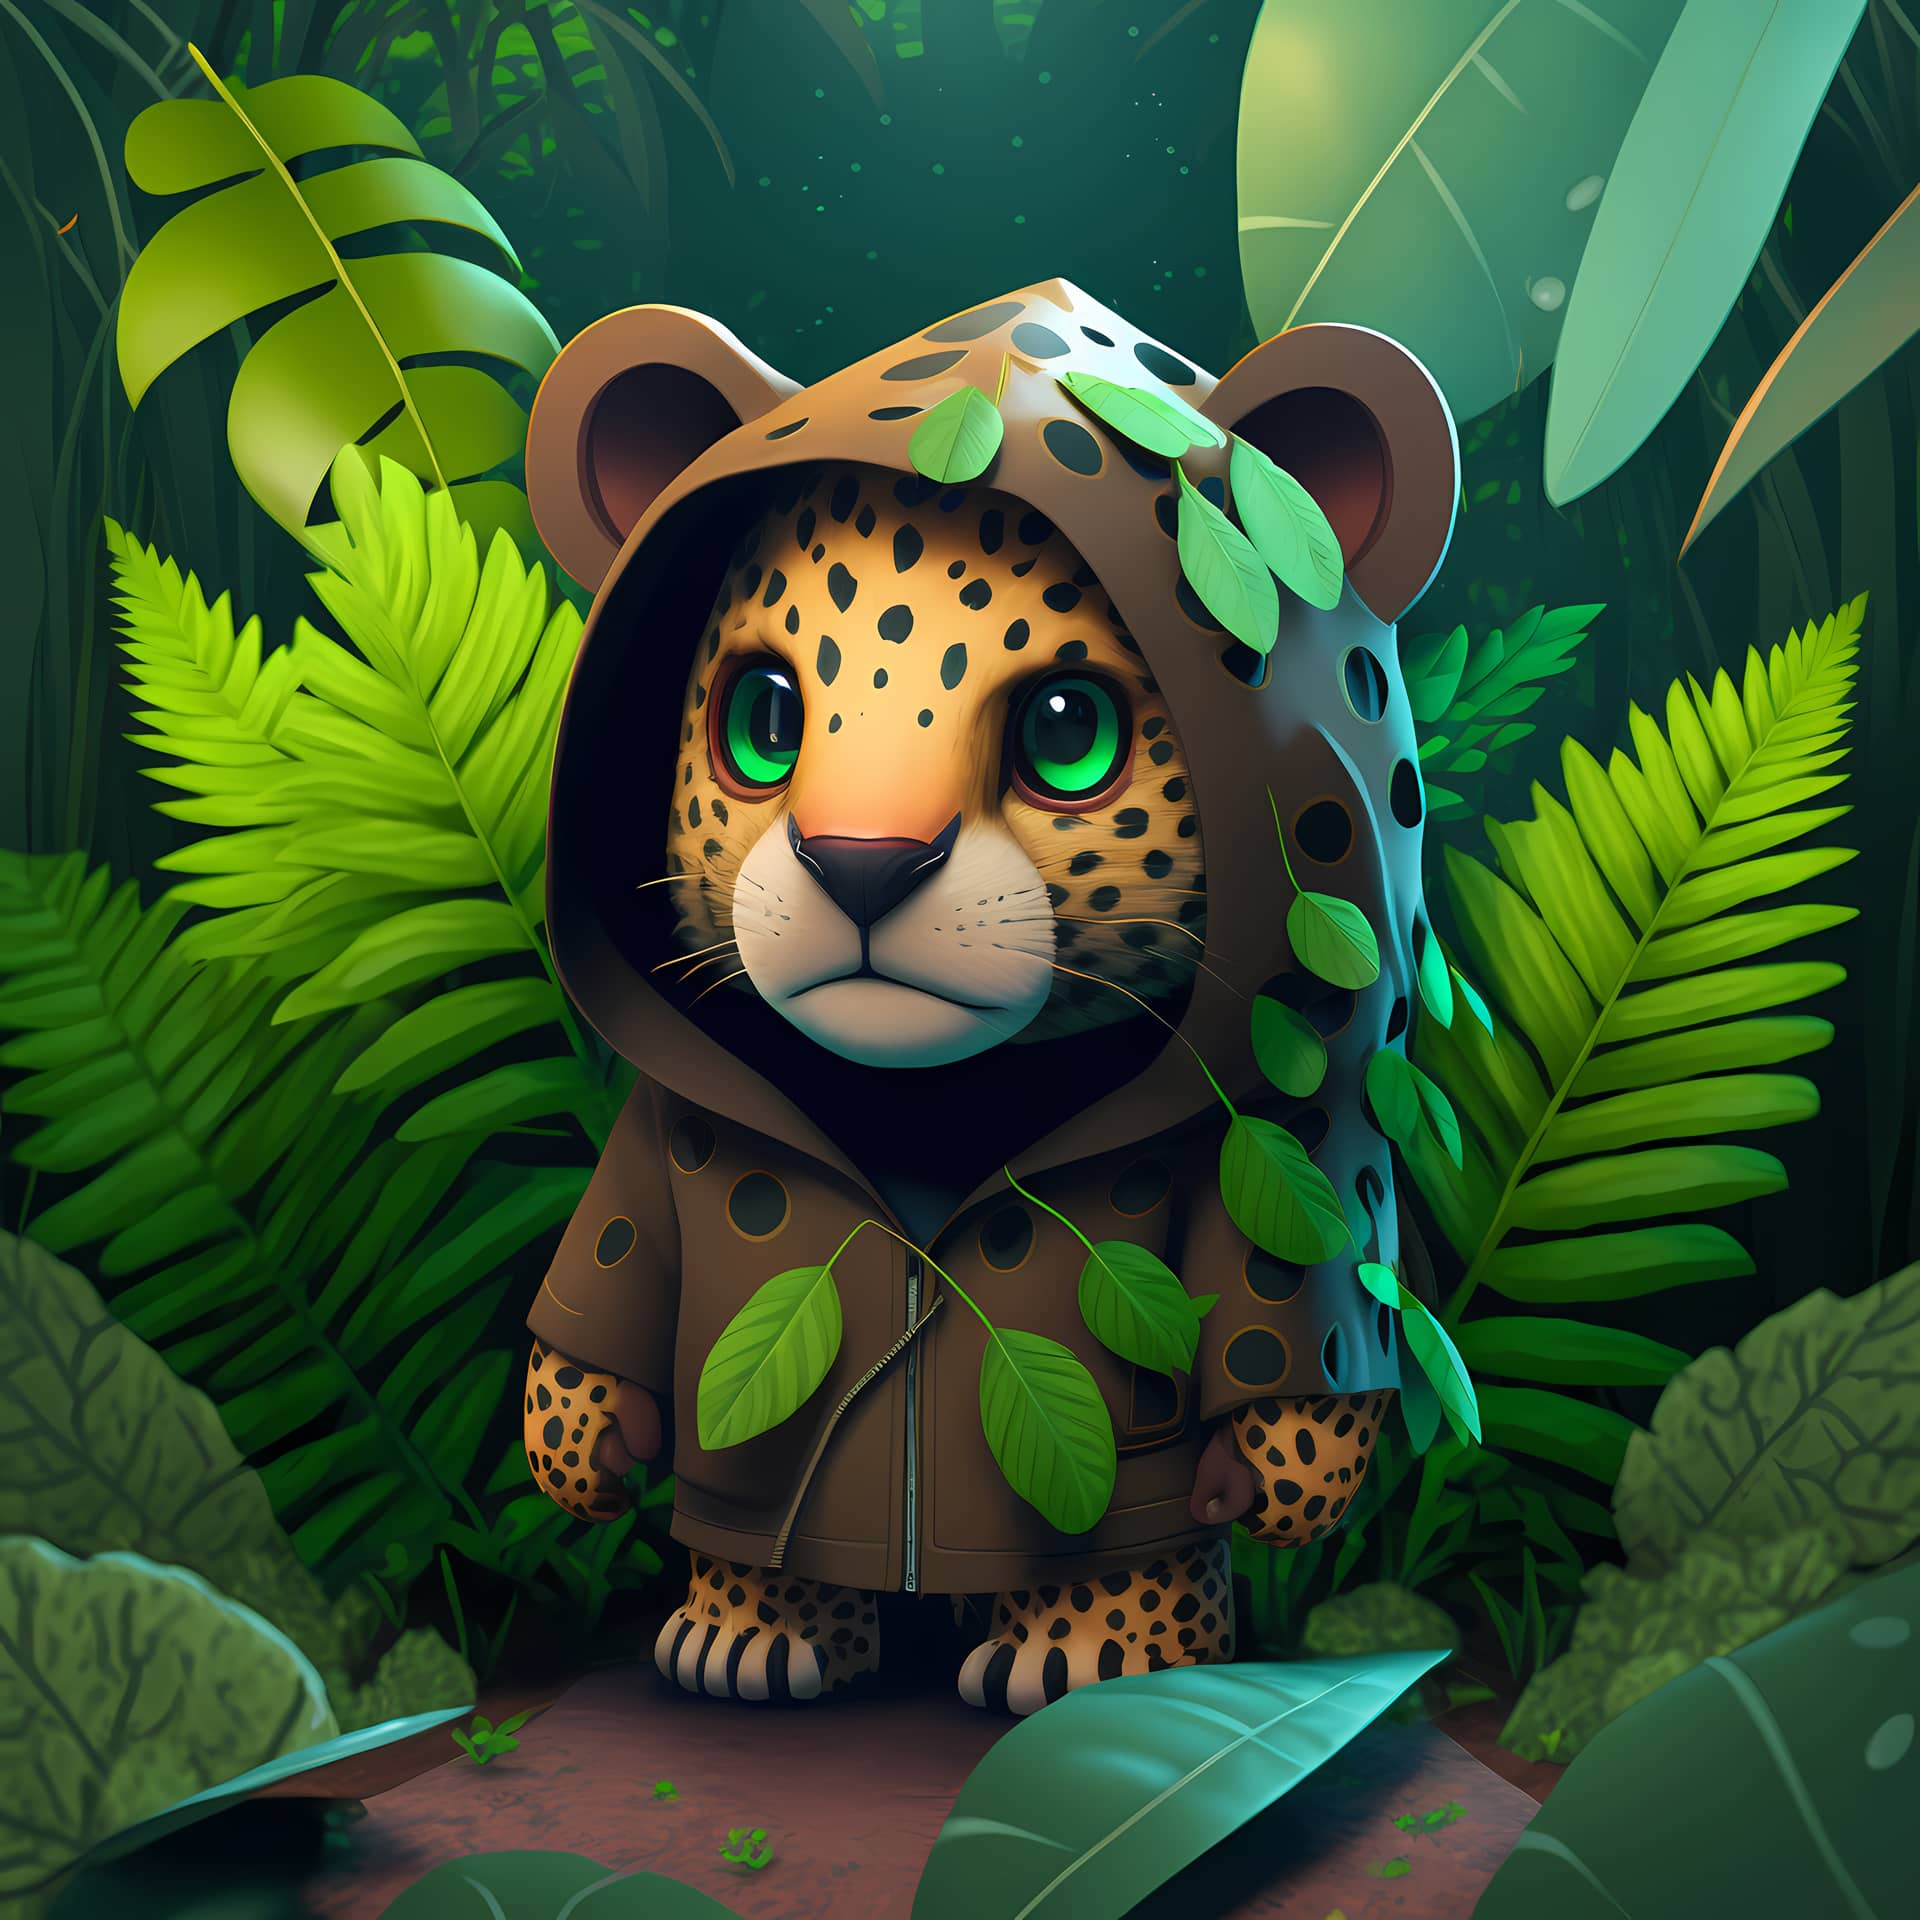 Adorable cute 3d tiger illustration with kawaii style jungle background